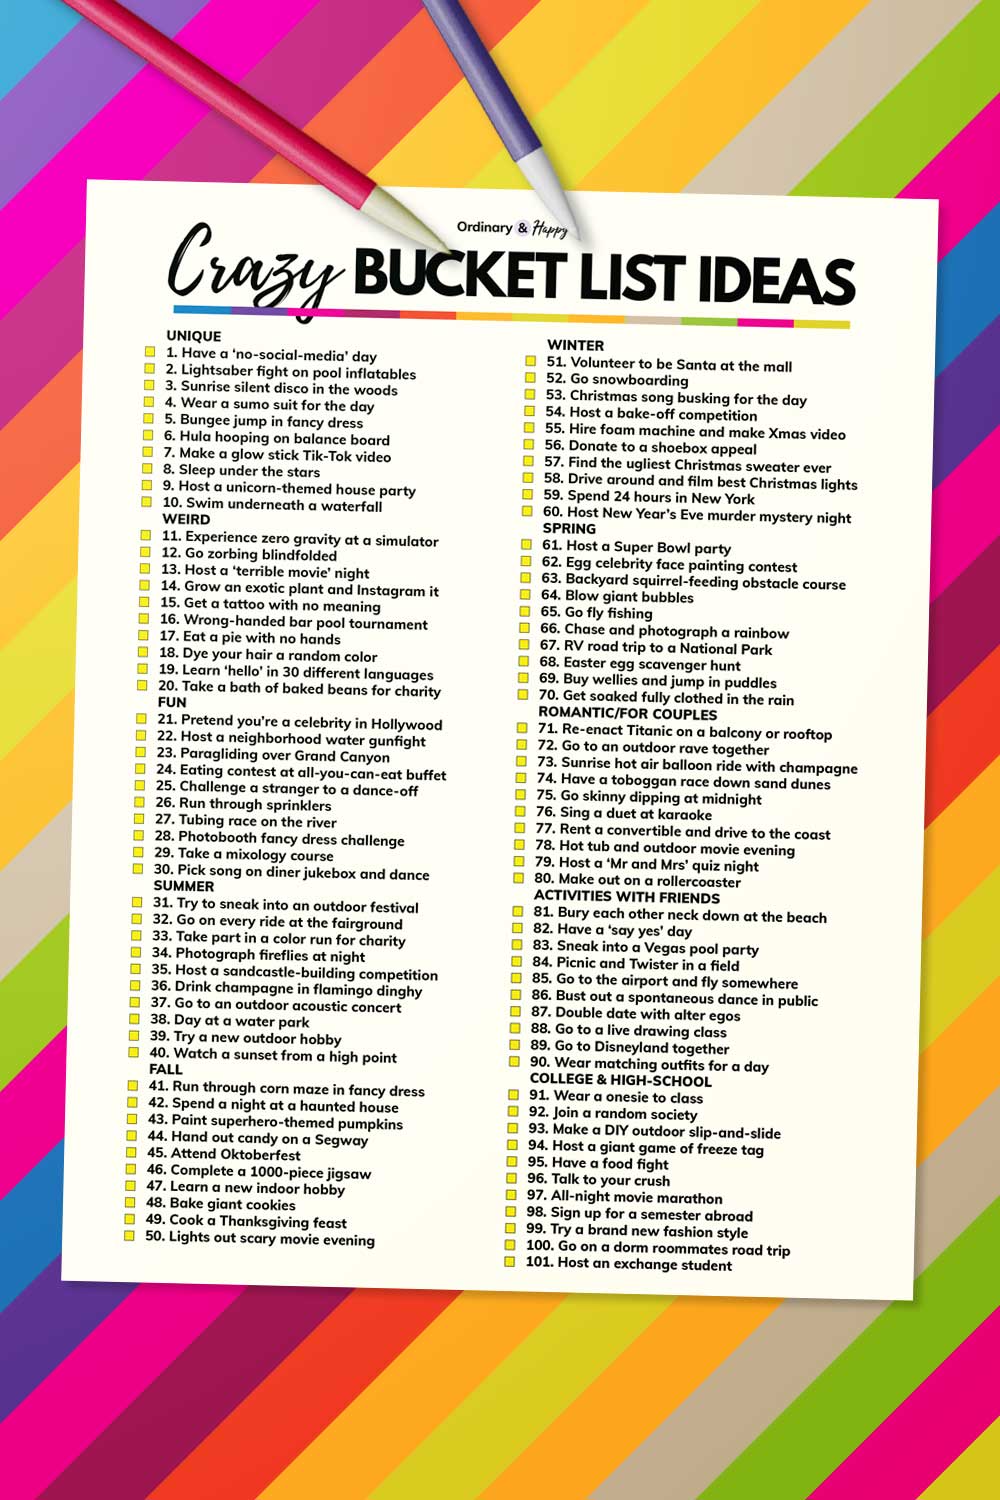 A Printable Grocery List With The Words Crazy Bucket List Ideas And ...